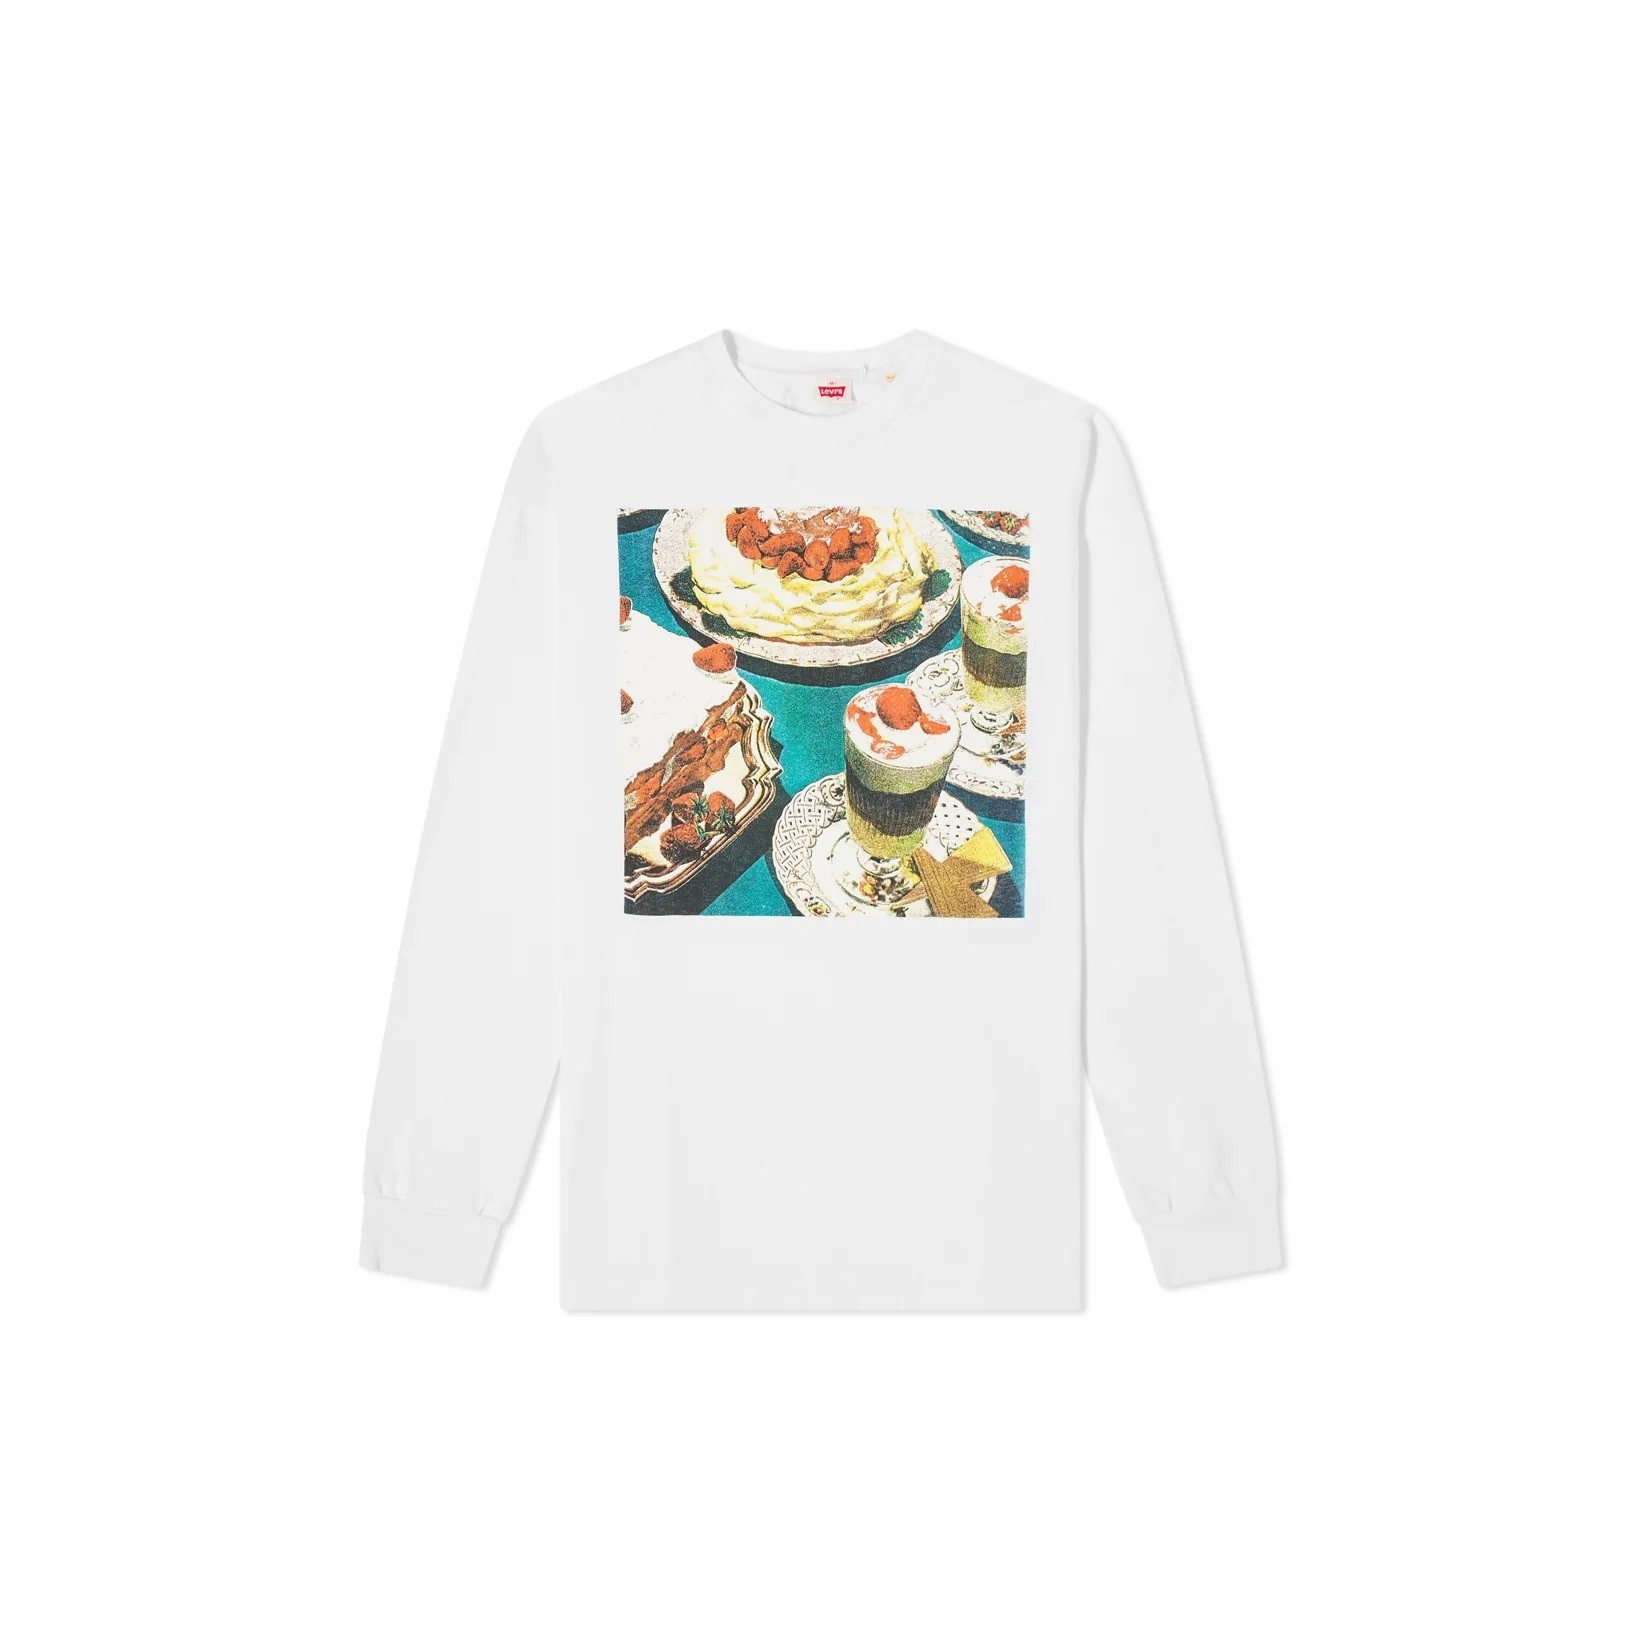 Levi's Vintage Clothing Happy Mondays Limited Edition 80's LS Graphic Tee  Squirrel Multi-colored